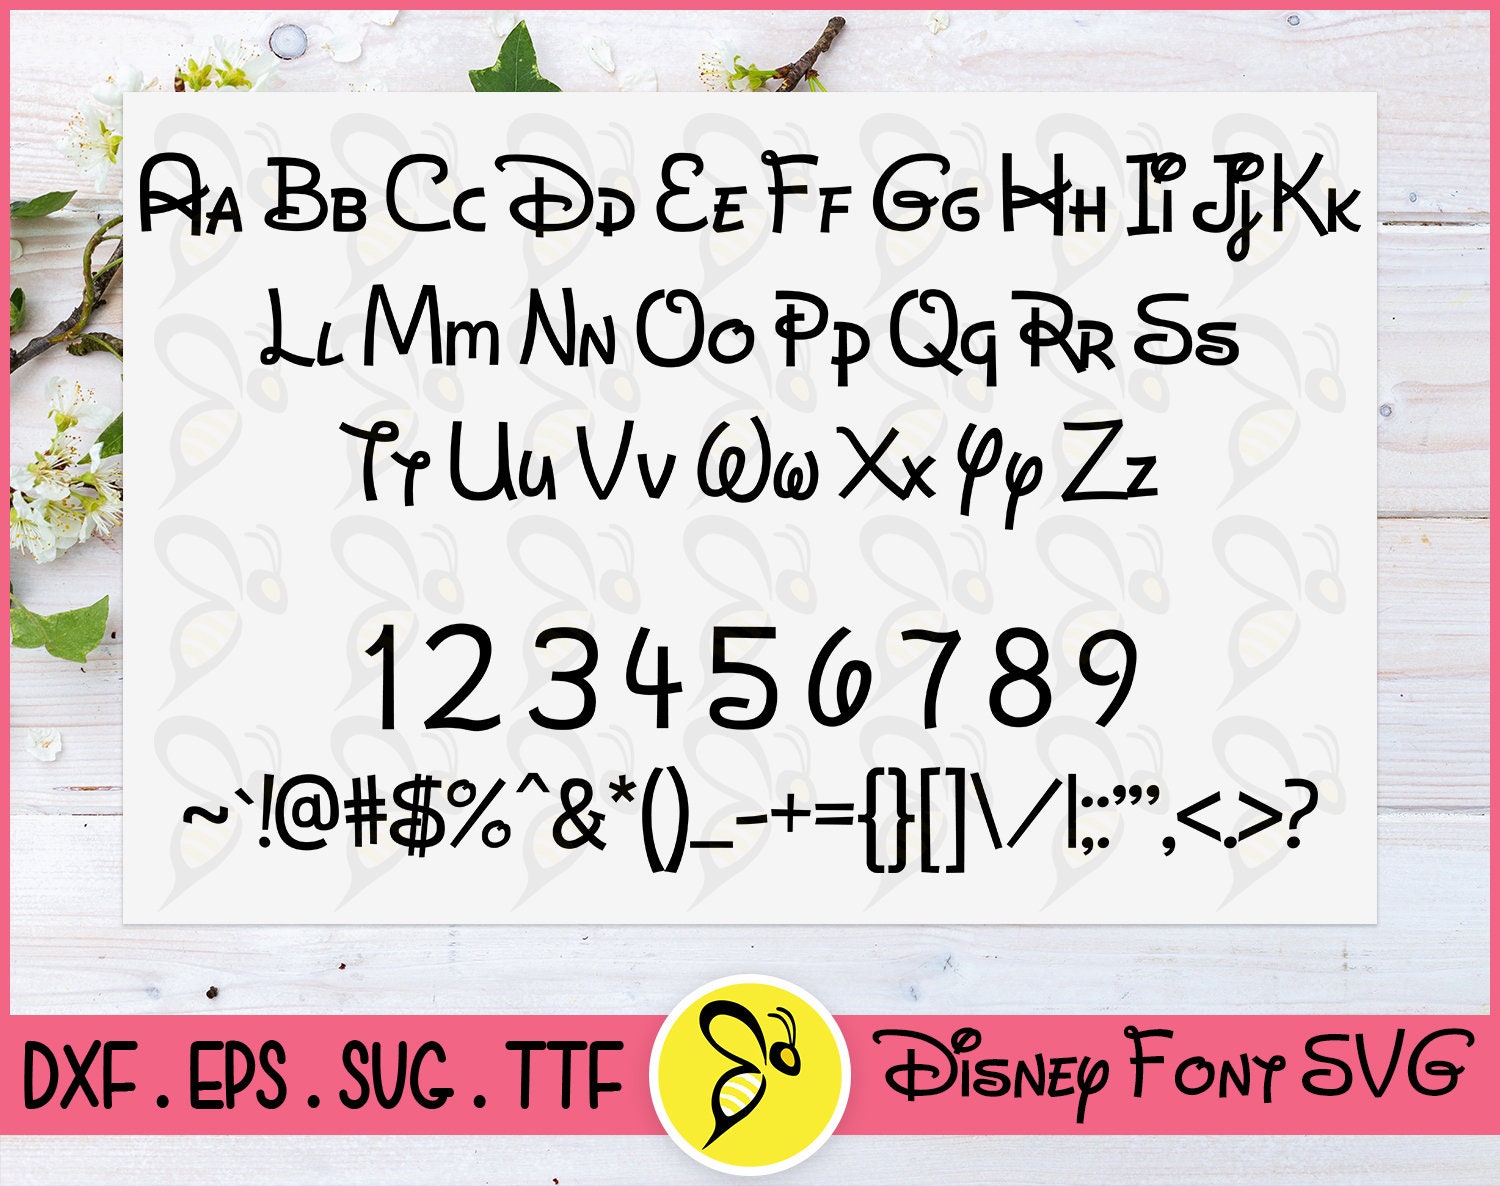 Lord Font Svg Png Pdf Dxf Alphabet Graphic by fromporto · Creative